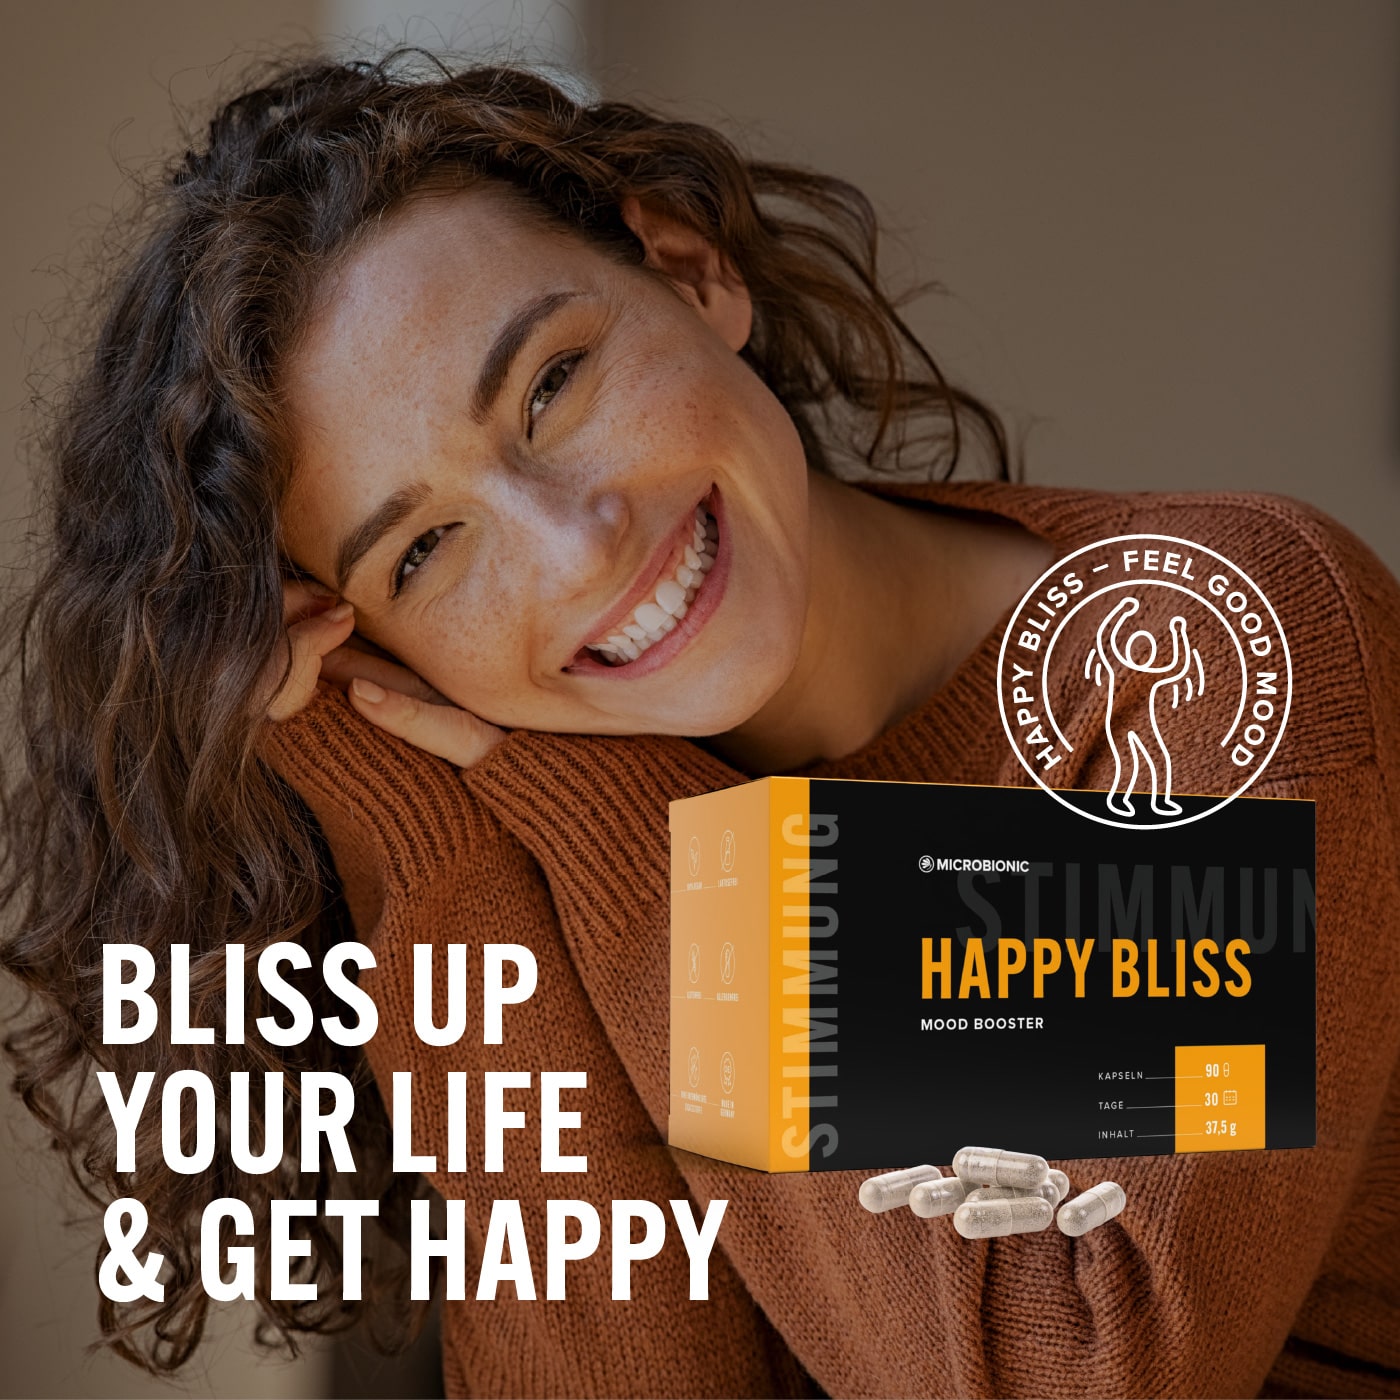 Happy Bliss - bliss up your life and get happy